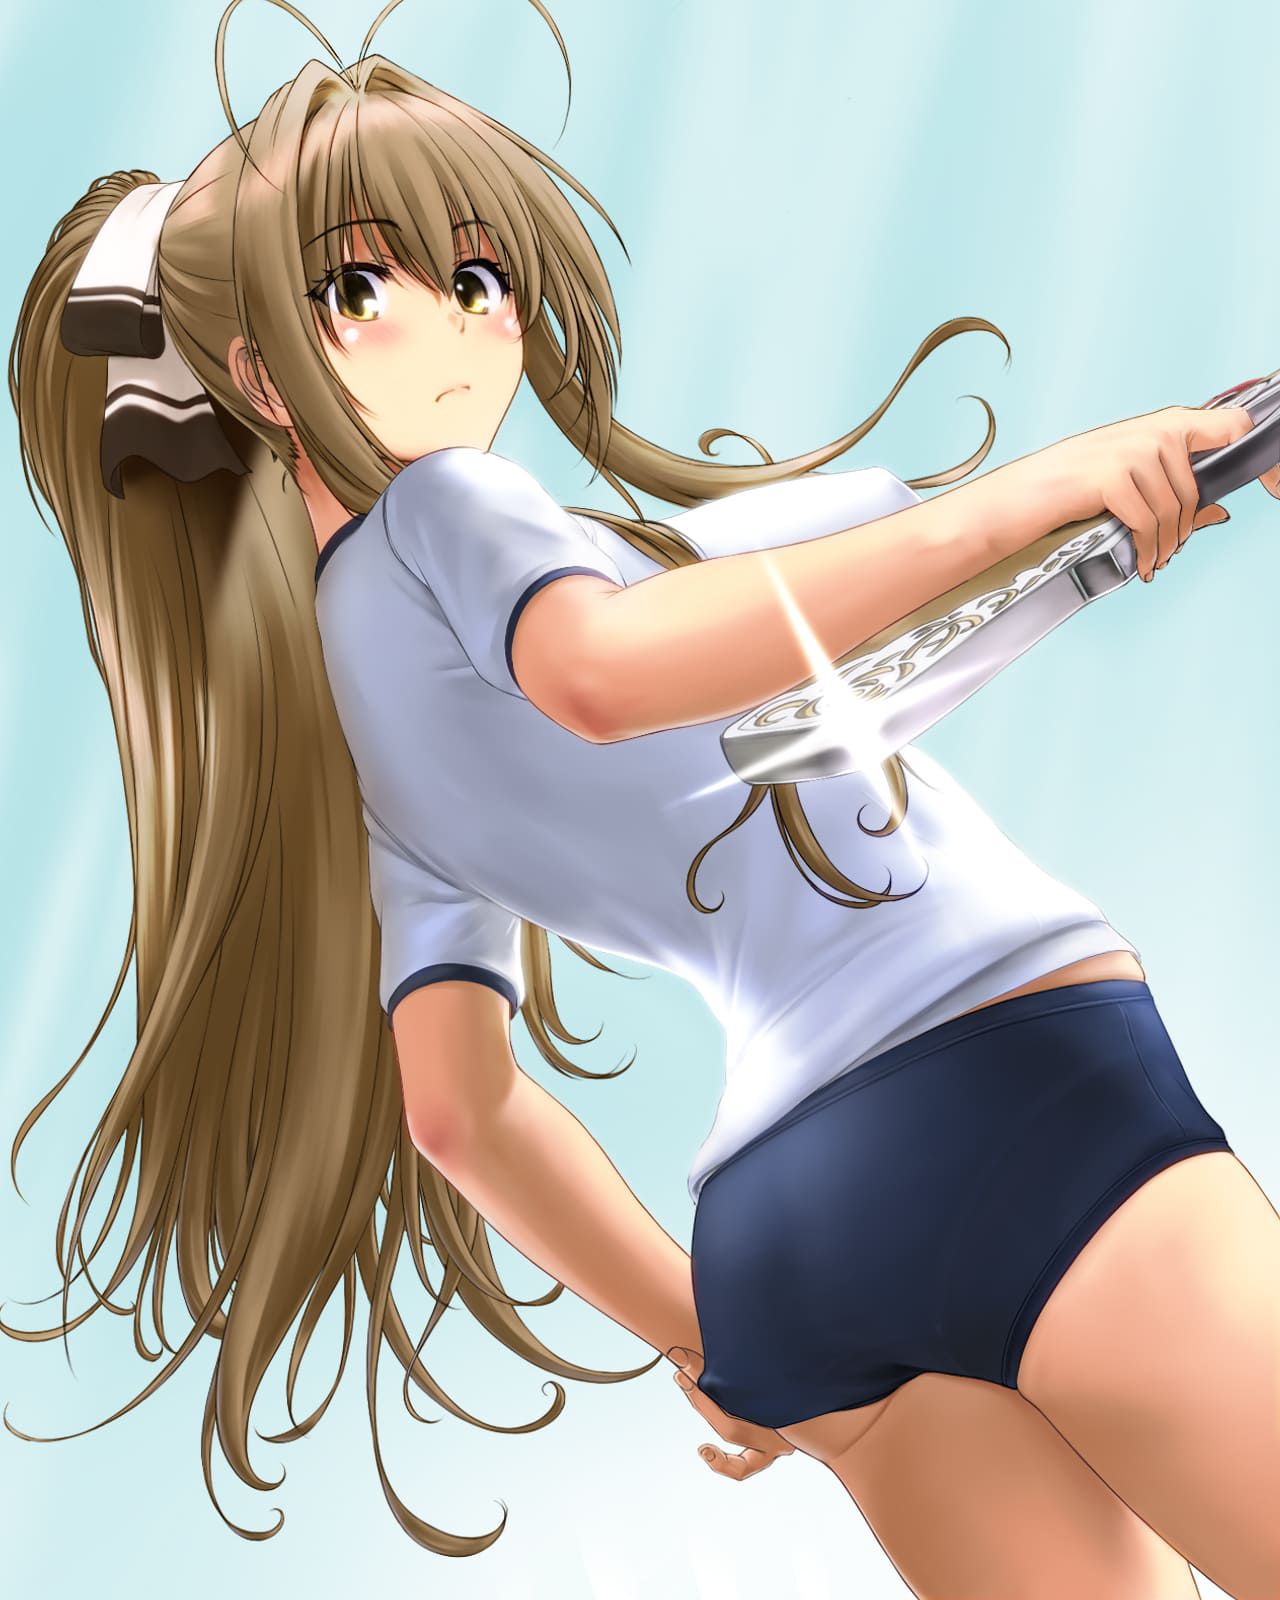 【Secondary】Cute daughter image in gym clothes and bruma 11